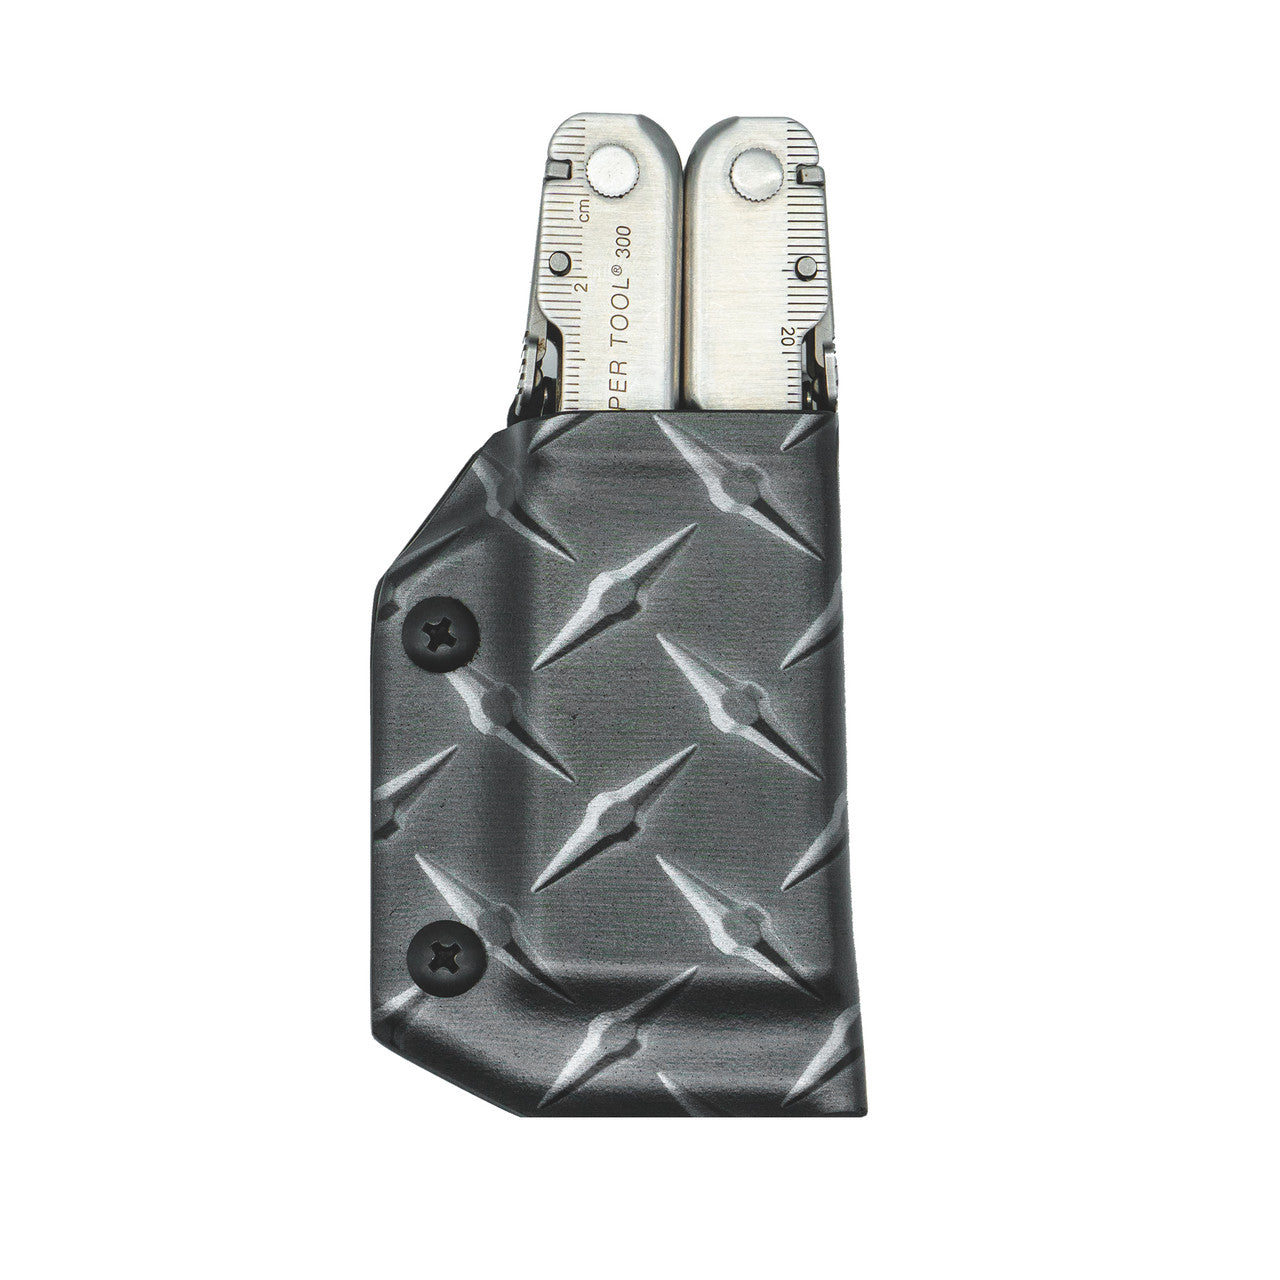 Kydex Sheath for the Leatherman Supertool 300 Clip & Carry